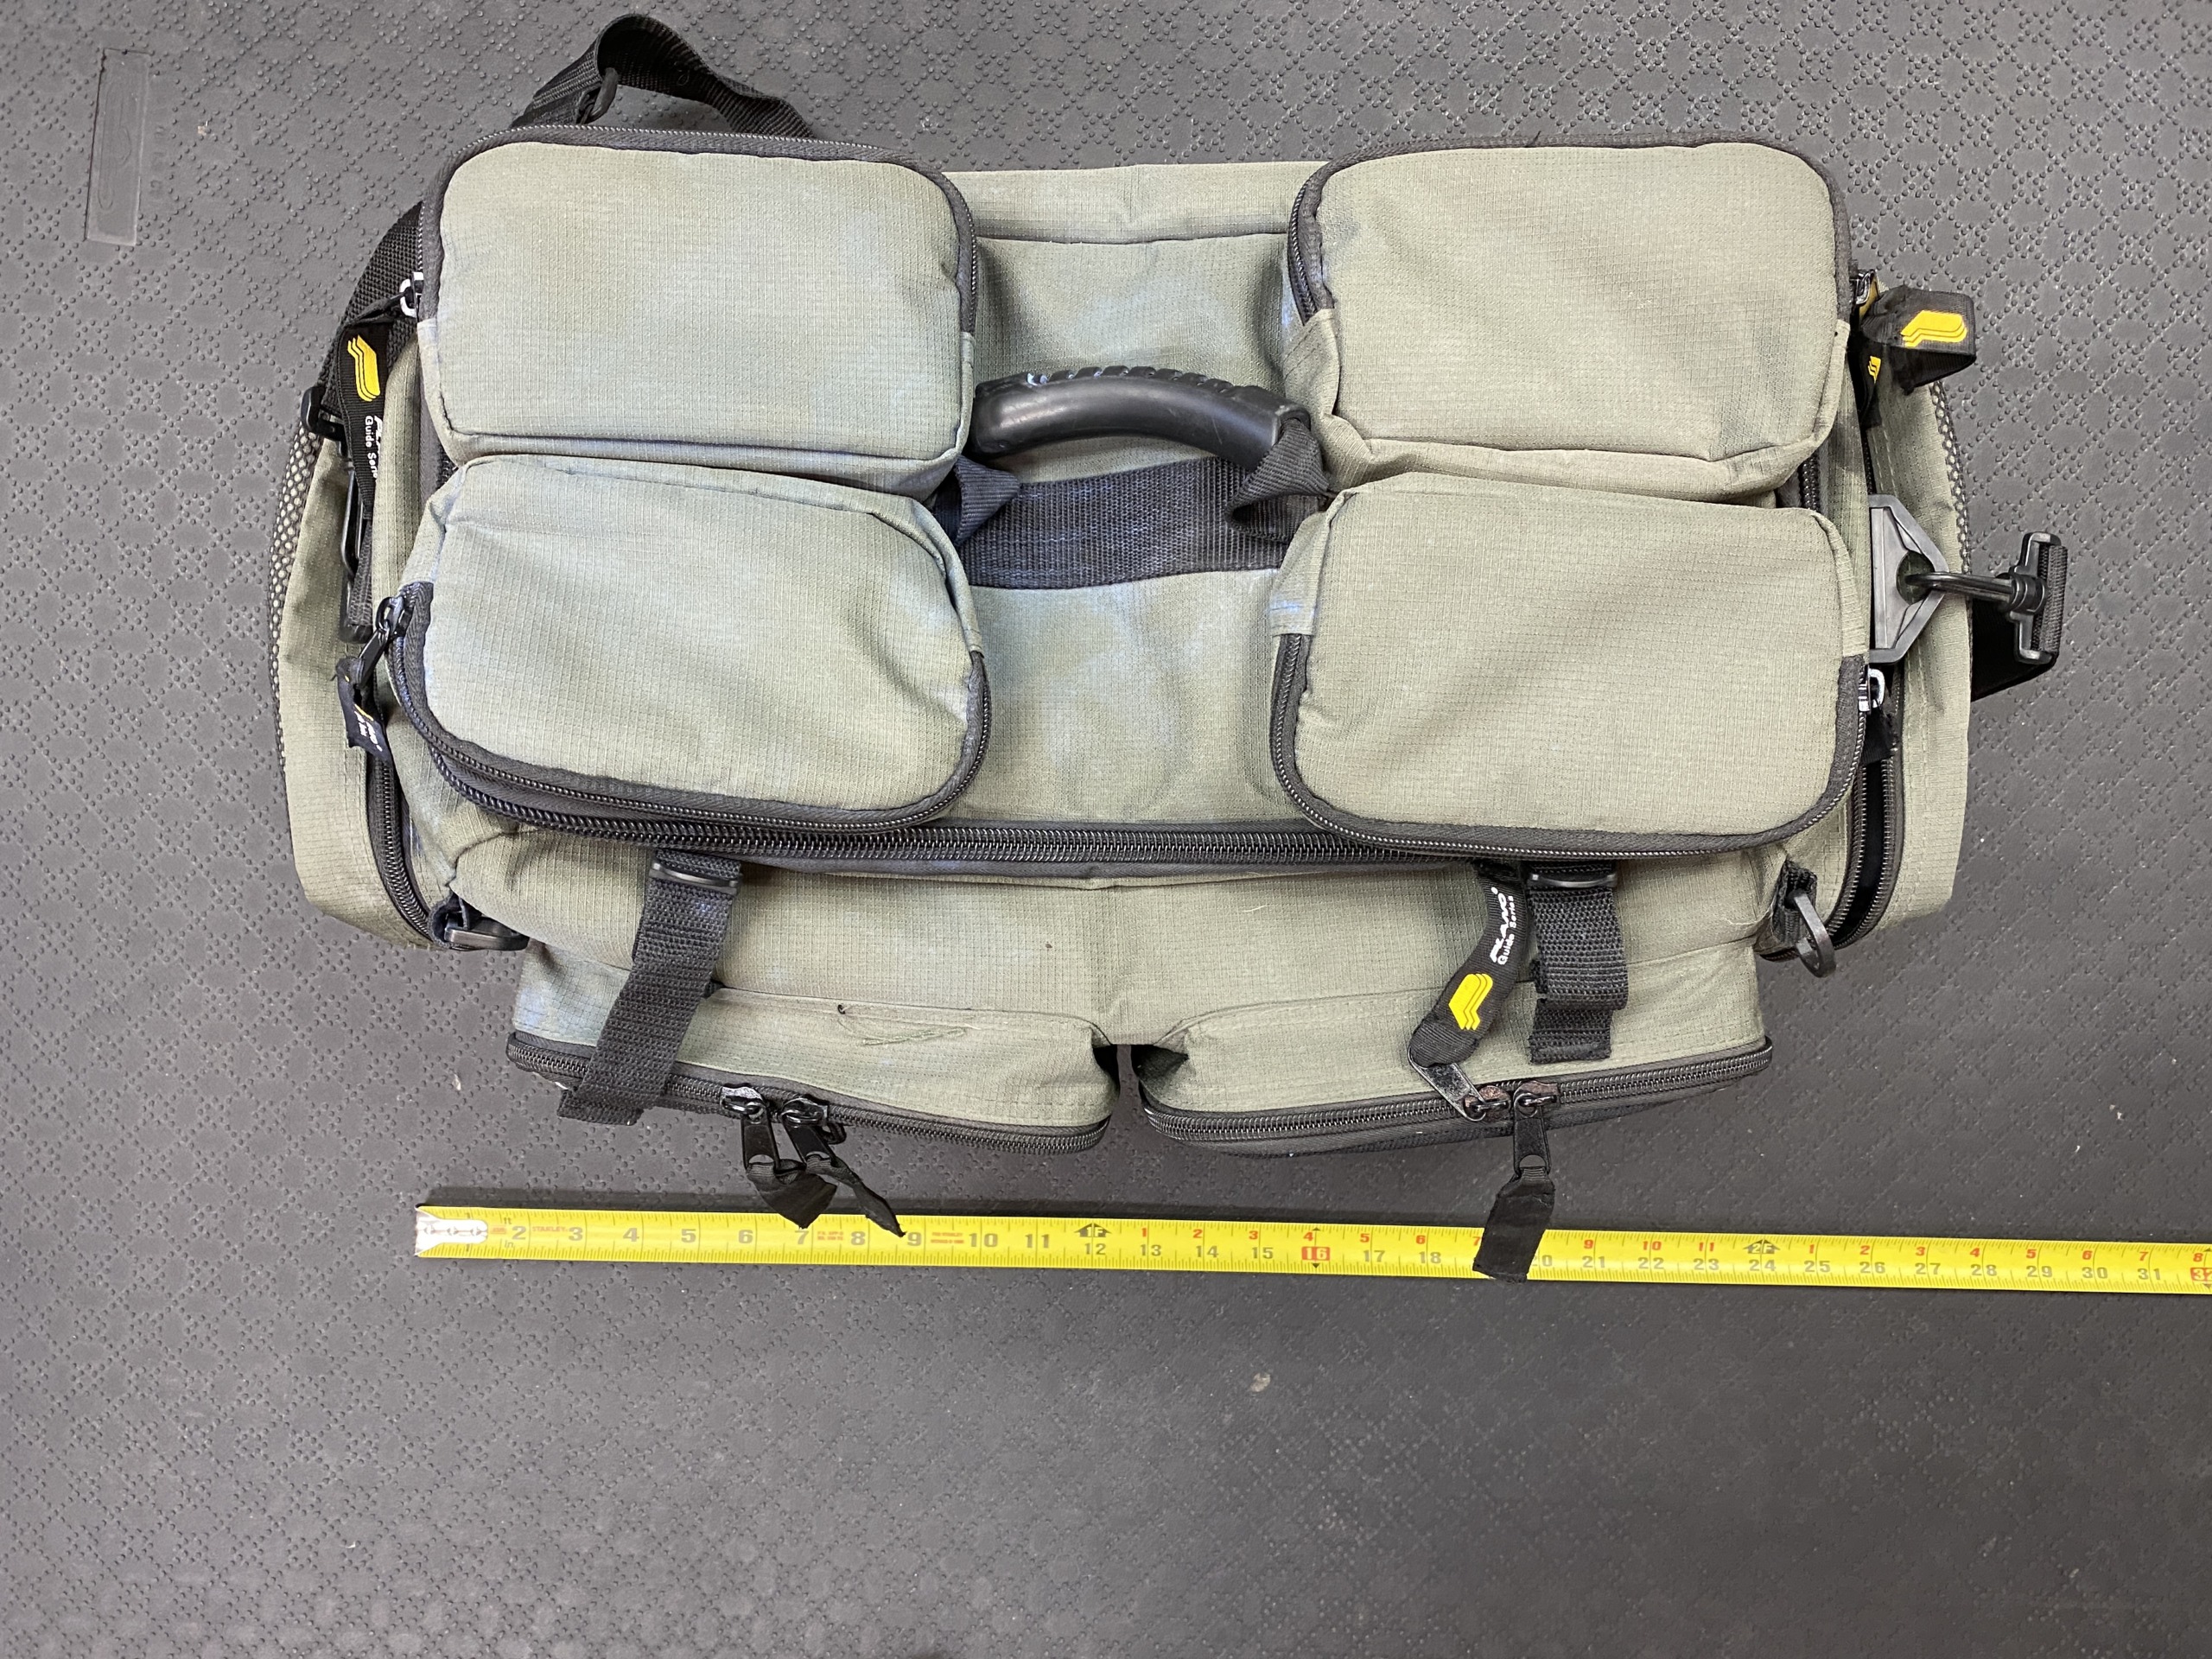 https://thefirstcast.ca/wp-content/uploads/2022/07/Plano-3700-Tackle-Bag-A-scaled.jpg